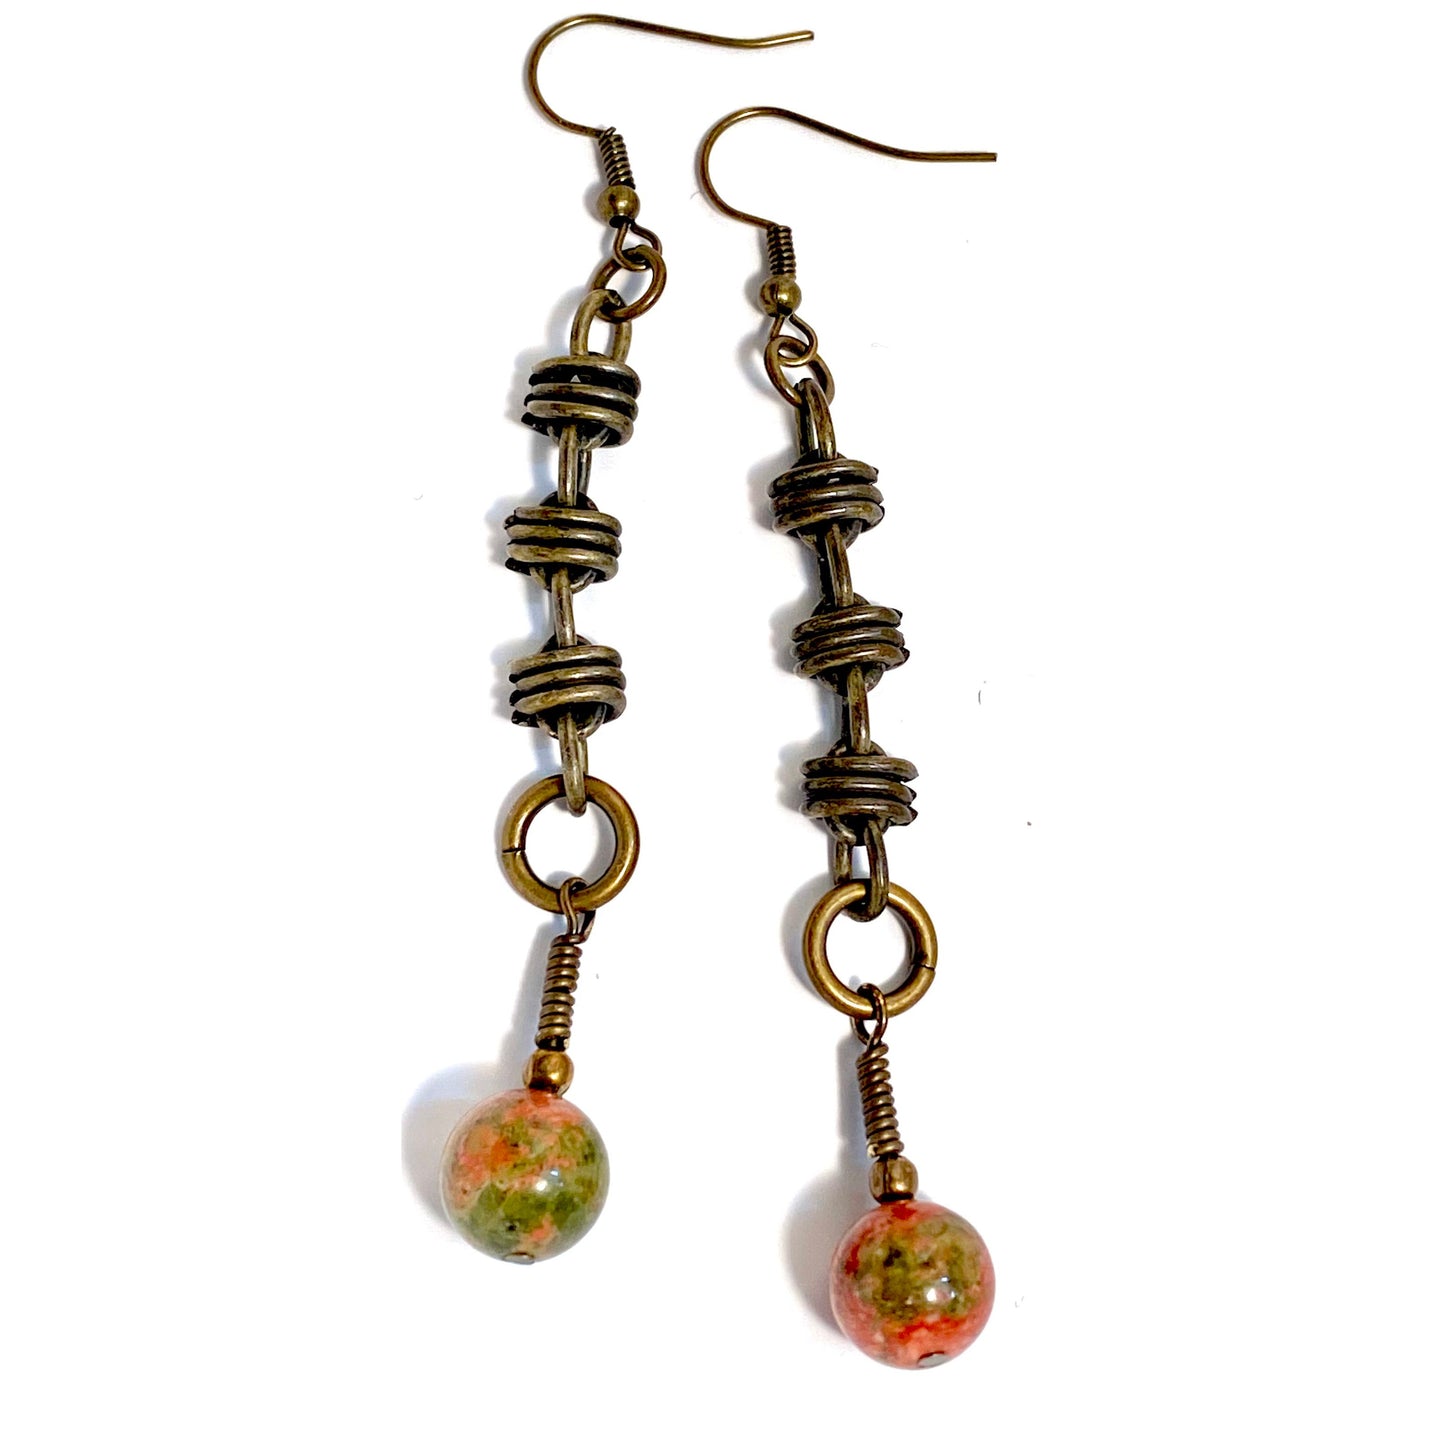 Linked Brass Chain Earrings with Unakite Beads